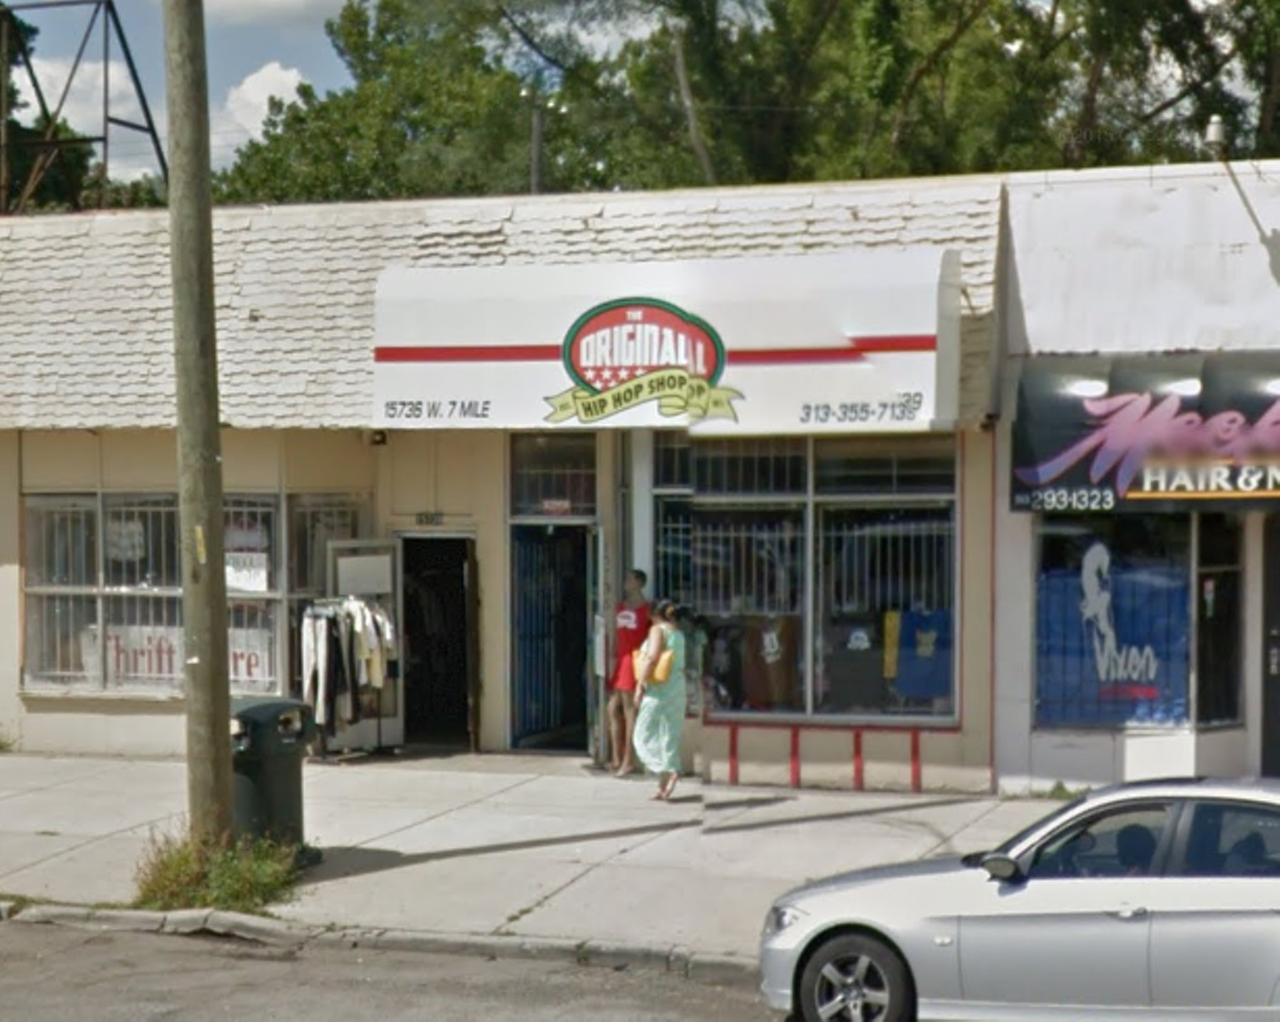 The Hip Hop Shop -- 
The Hip Hop Shop started off as a clothing store, intended to showcase a brand of the same name conceived by local entrepreneur Maurice Malone. But history will remember the Hip Hop Shop not for its oversized t-shirts, but for regular freestyle battles hosted by the late, great Proof.  (Image &#150; Google Maps)